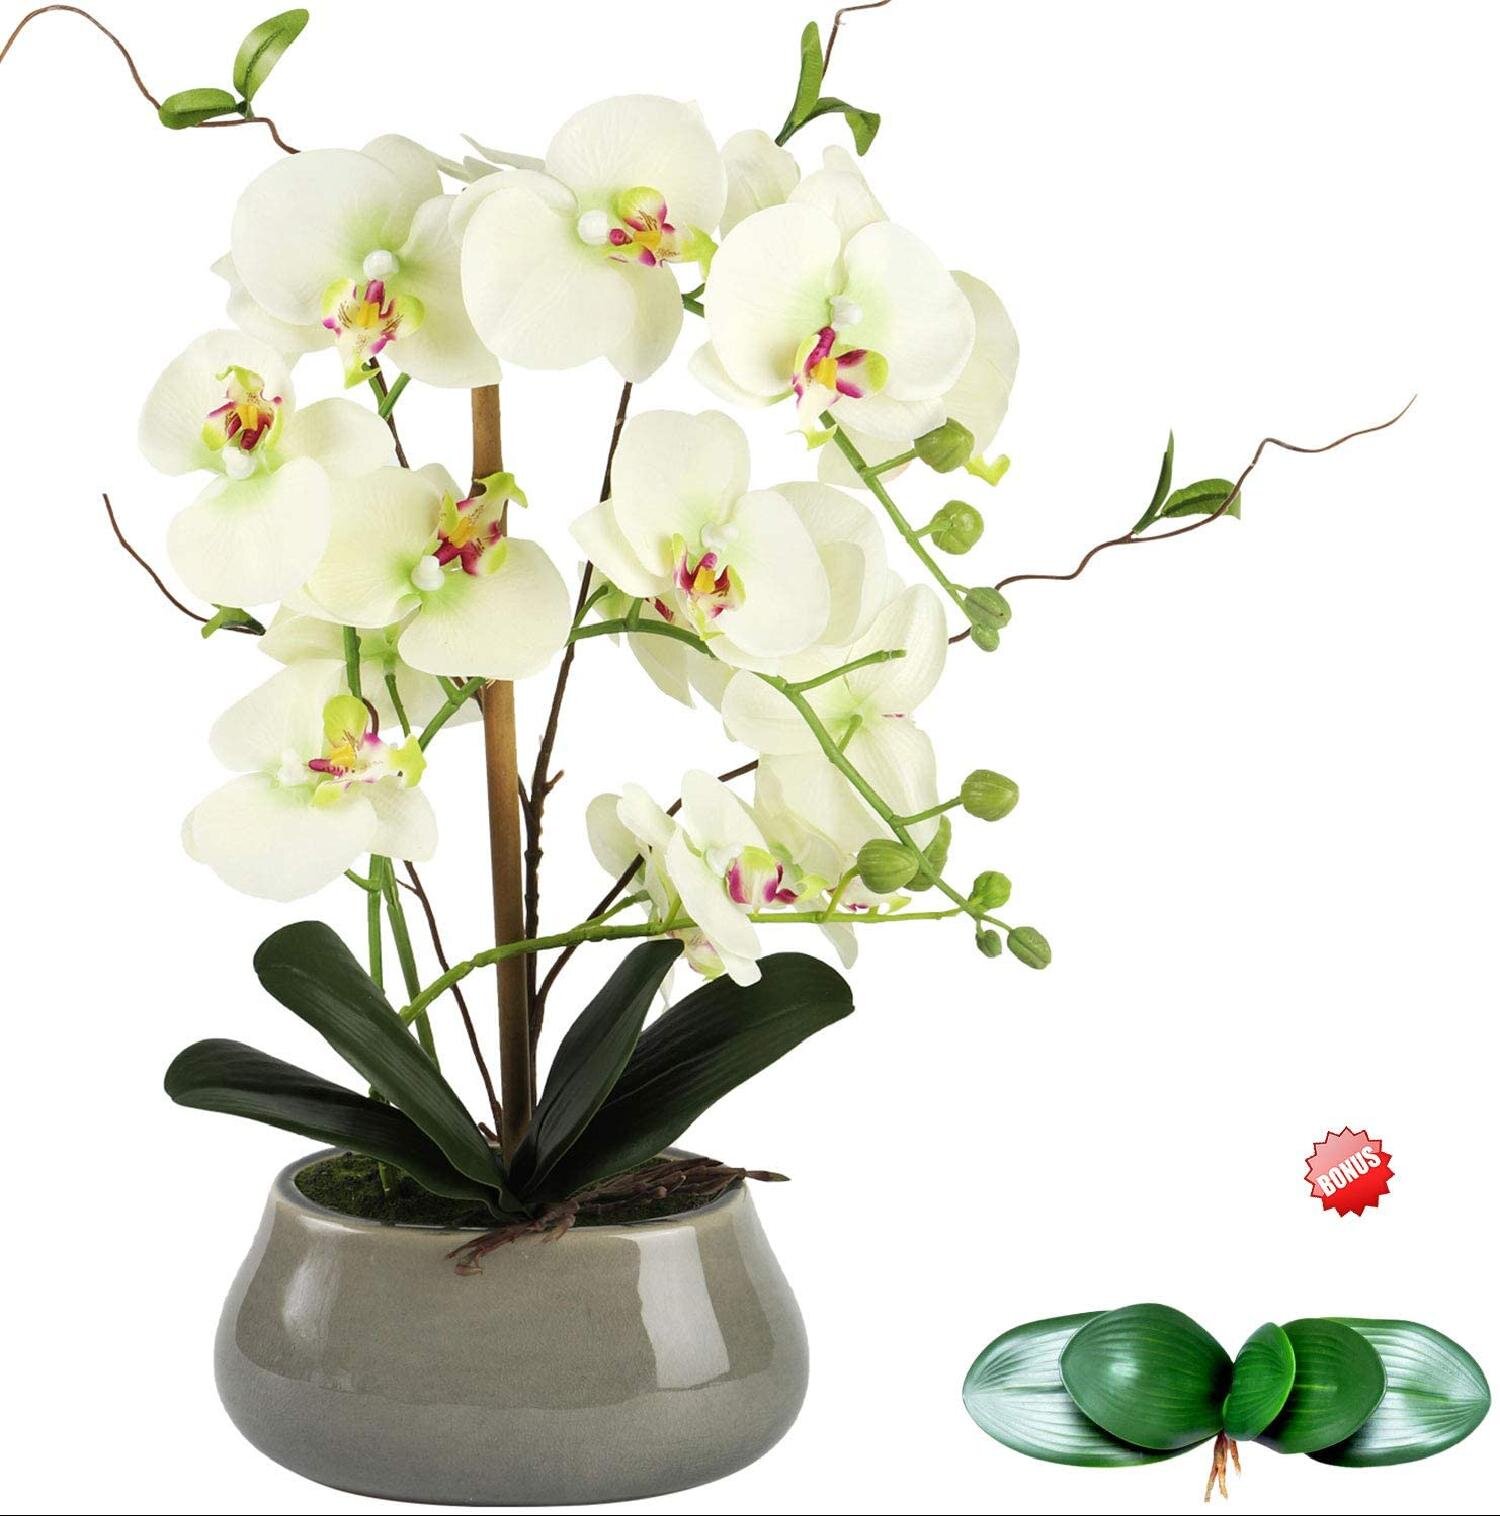 White, Large Artificial Silk Moth Orchid Flowers in Transparent Glass Vase Coffee Table Arrangement Centerpiece Decor Real Touch Natural Looking Phalaenopsis Flowers and Greens 